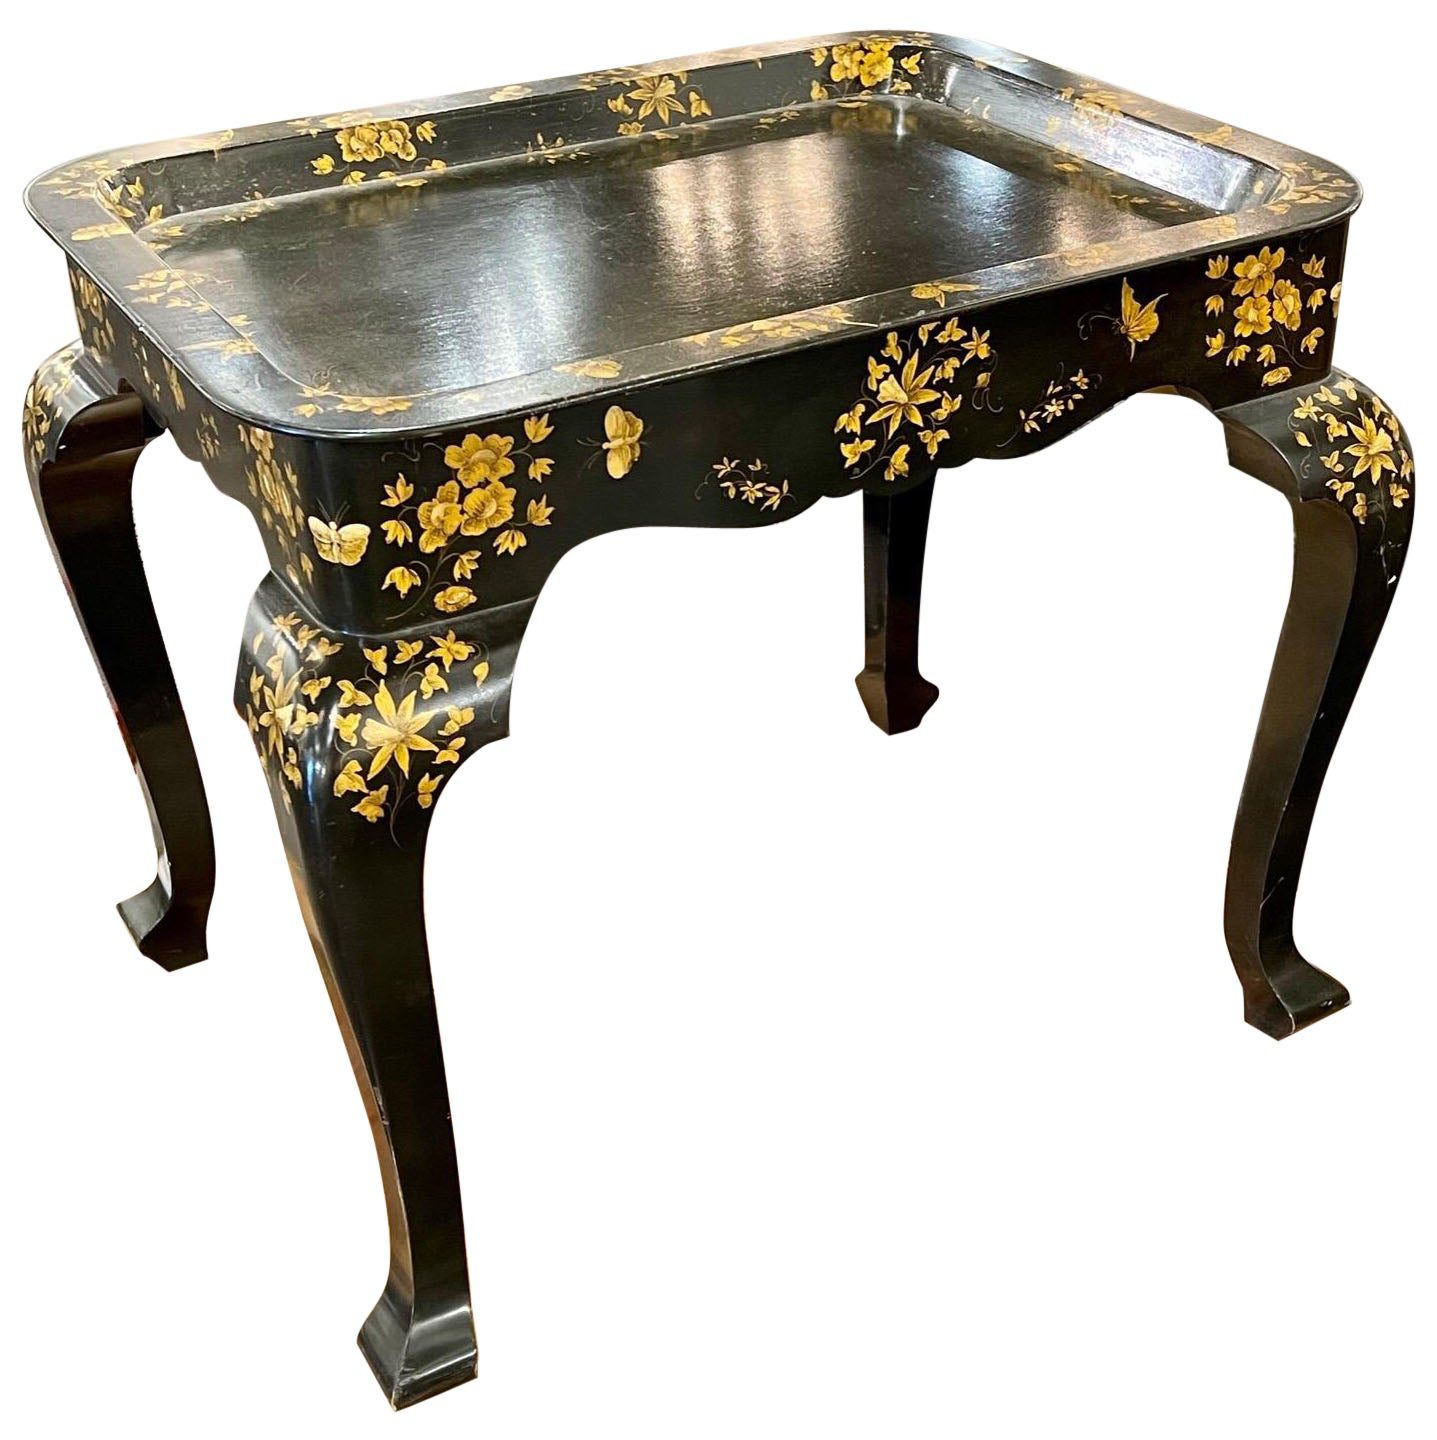 Black & Gold Painted Piece  Metallic painted furniture, Gold painted  furniture, Funky painted furniture